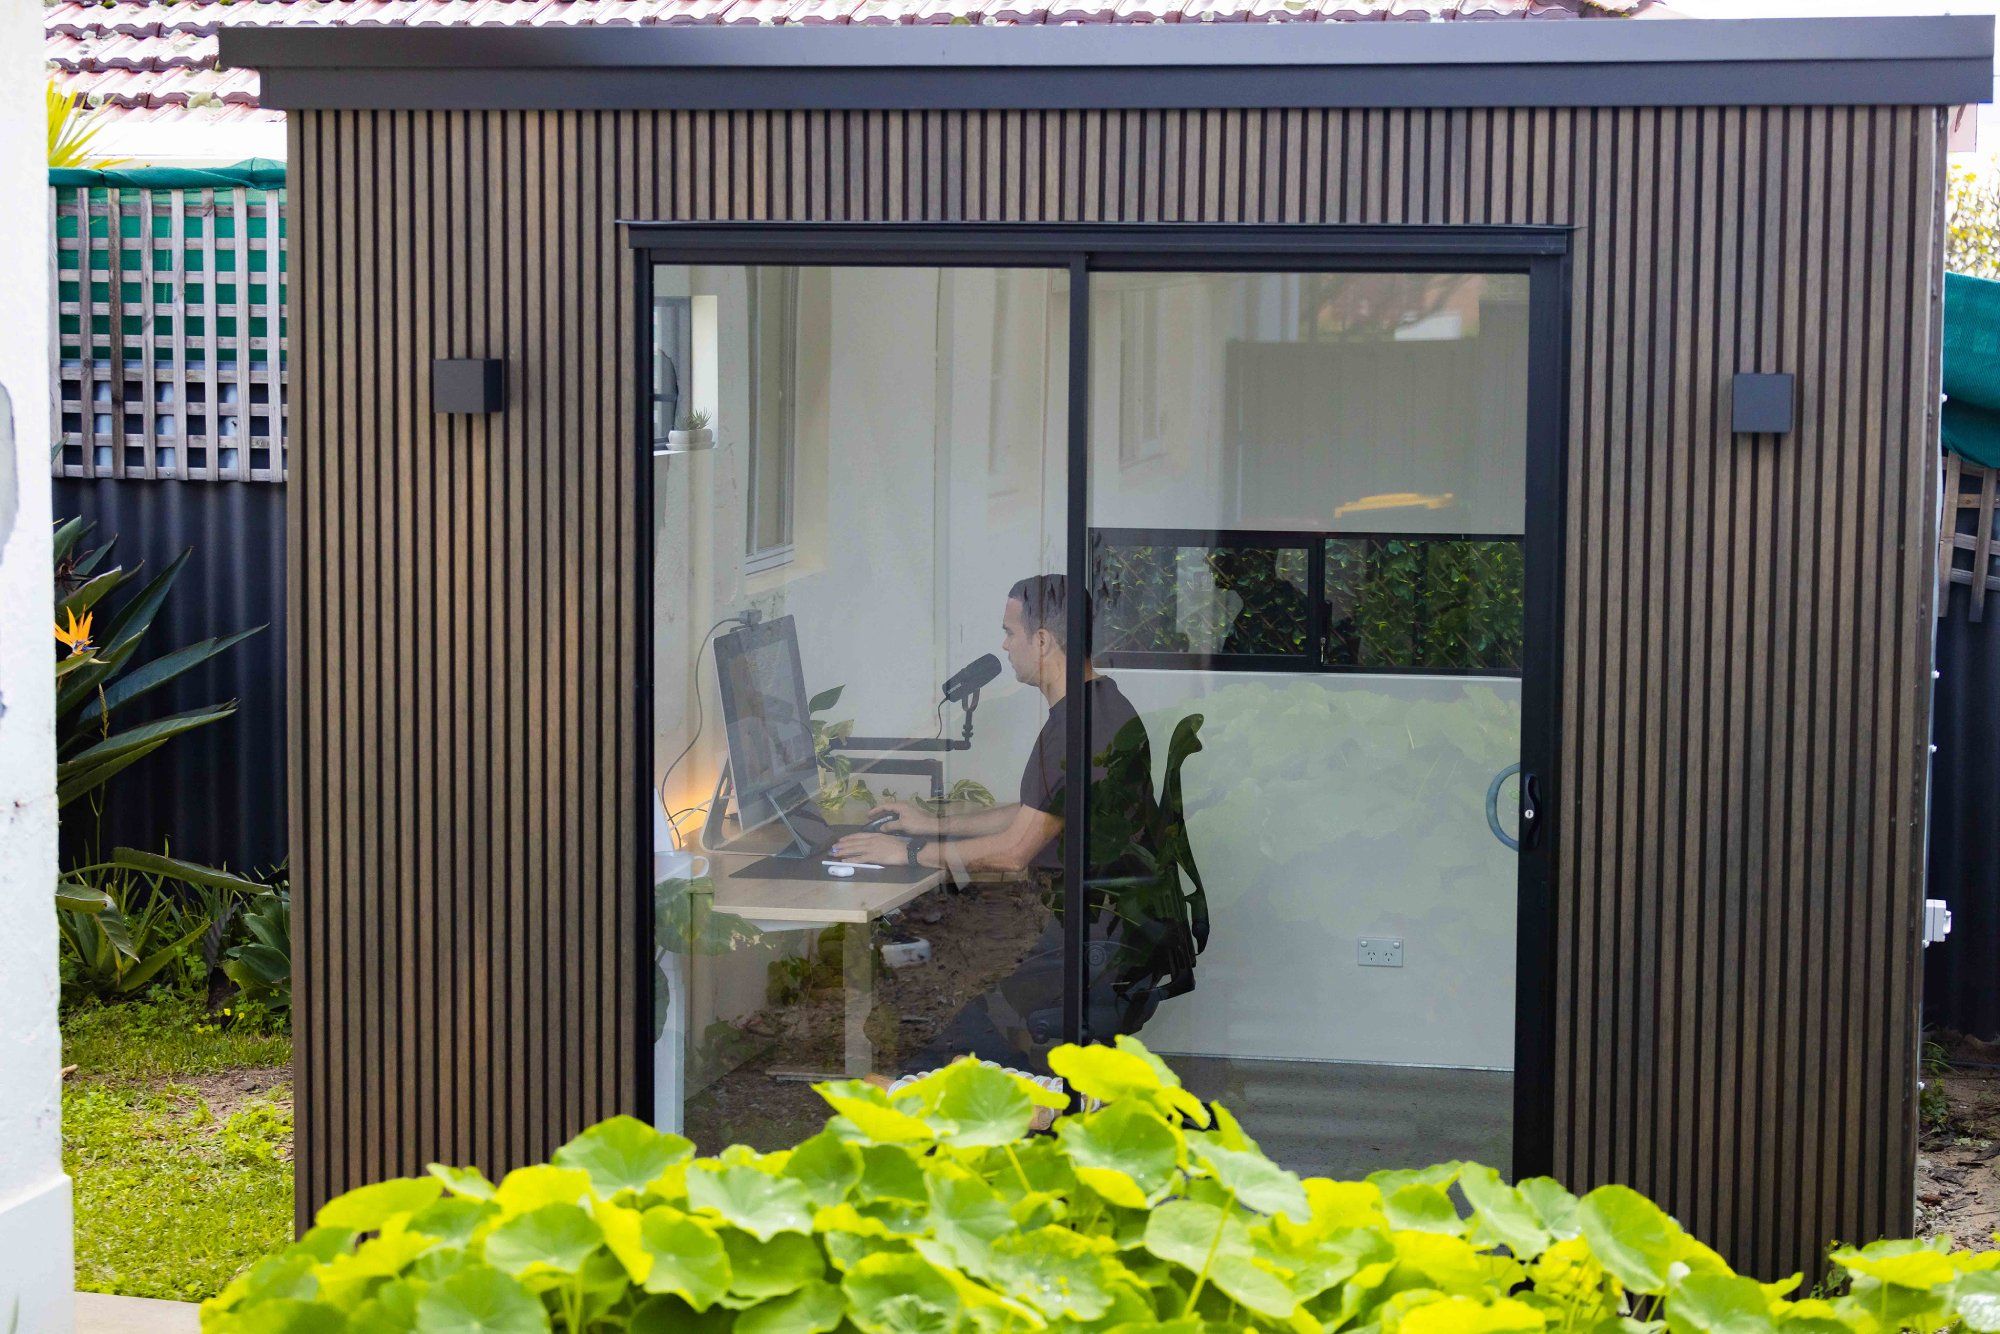 A designer working from his garden office pod